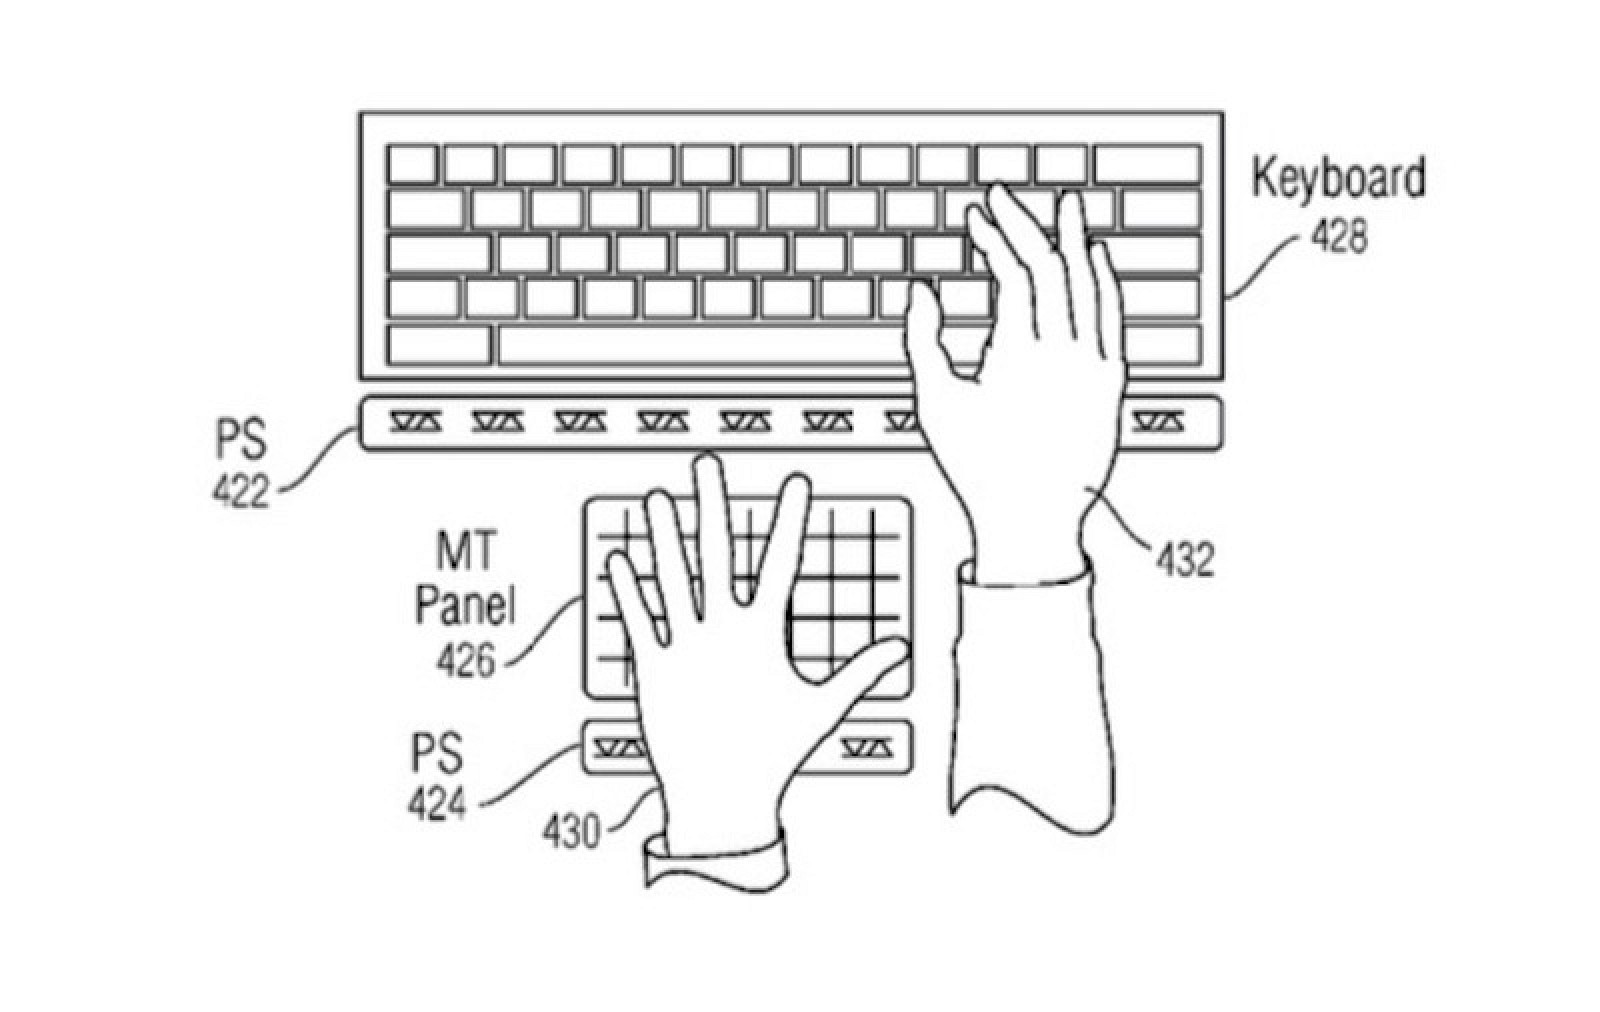 Apple Patents Hover-Sensing Multi-Touch Display for Macs